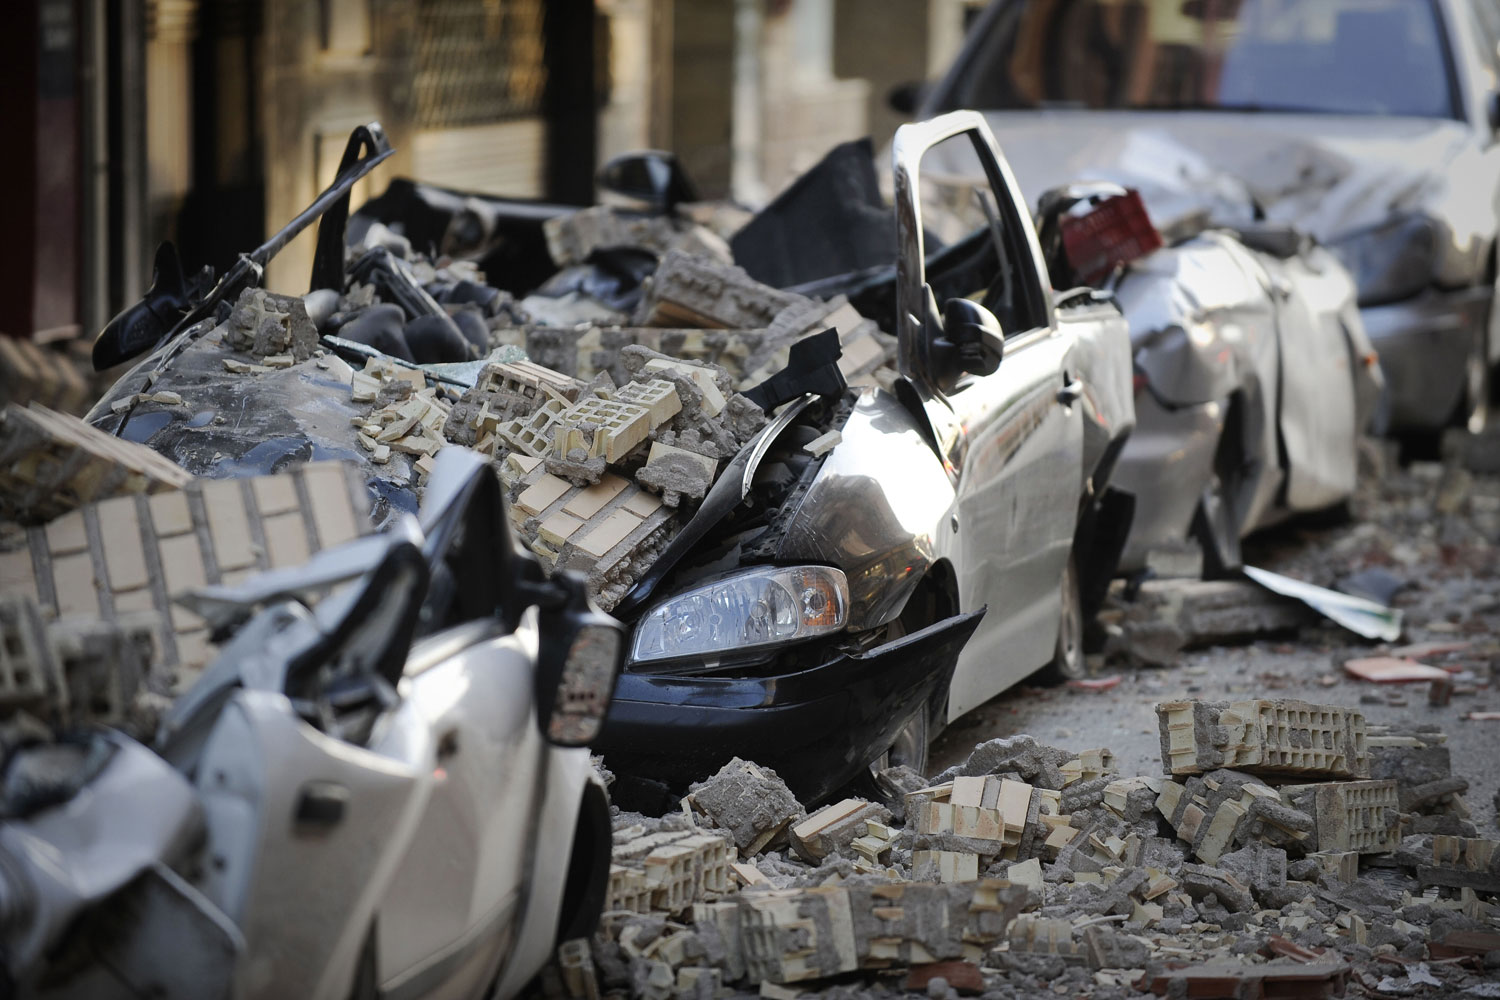 May 12, 2011. Cars crashed by debris in Lorca, southern Spain after a magnitude 5.1 quake killed at least 8 people, toppling buildings into the streets and sending panicked residents fleeing. Thousands of terrified Lorca residents spent a night shivering in parking lots, public squares and playgrounds fearing aftershocks from a quake of an intensity they never expected.